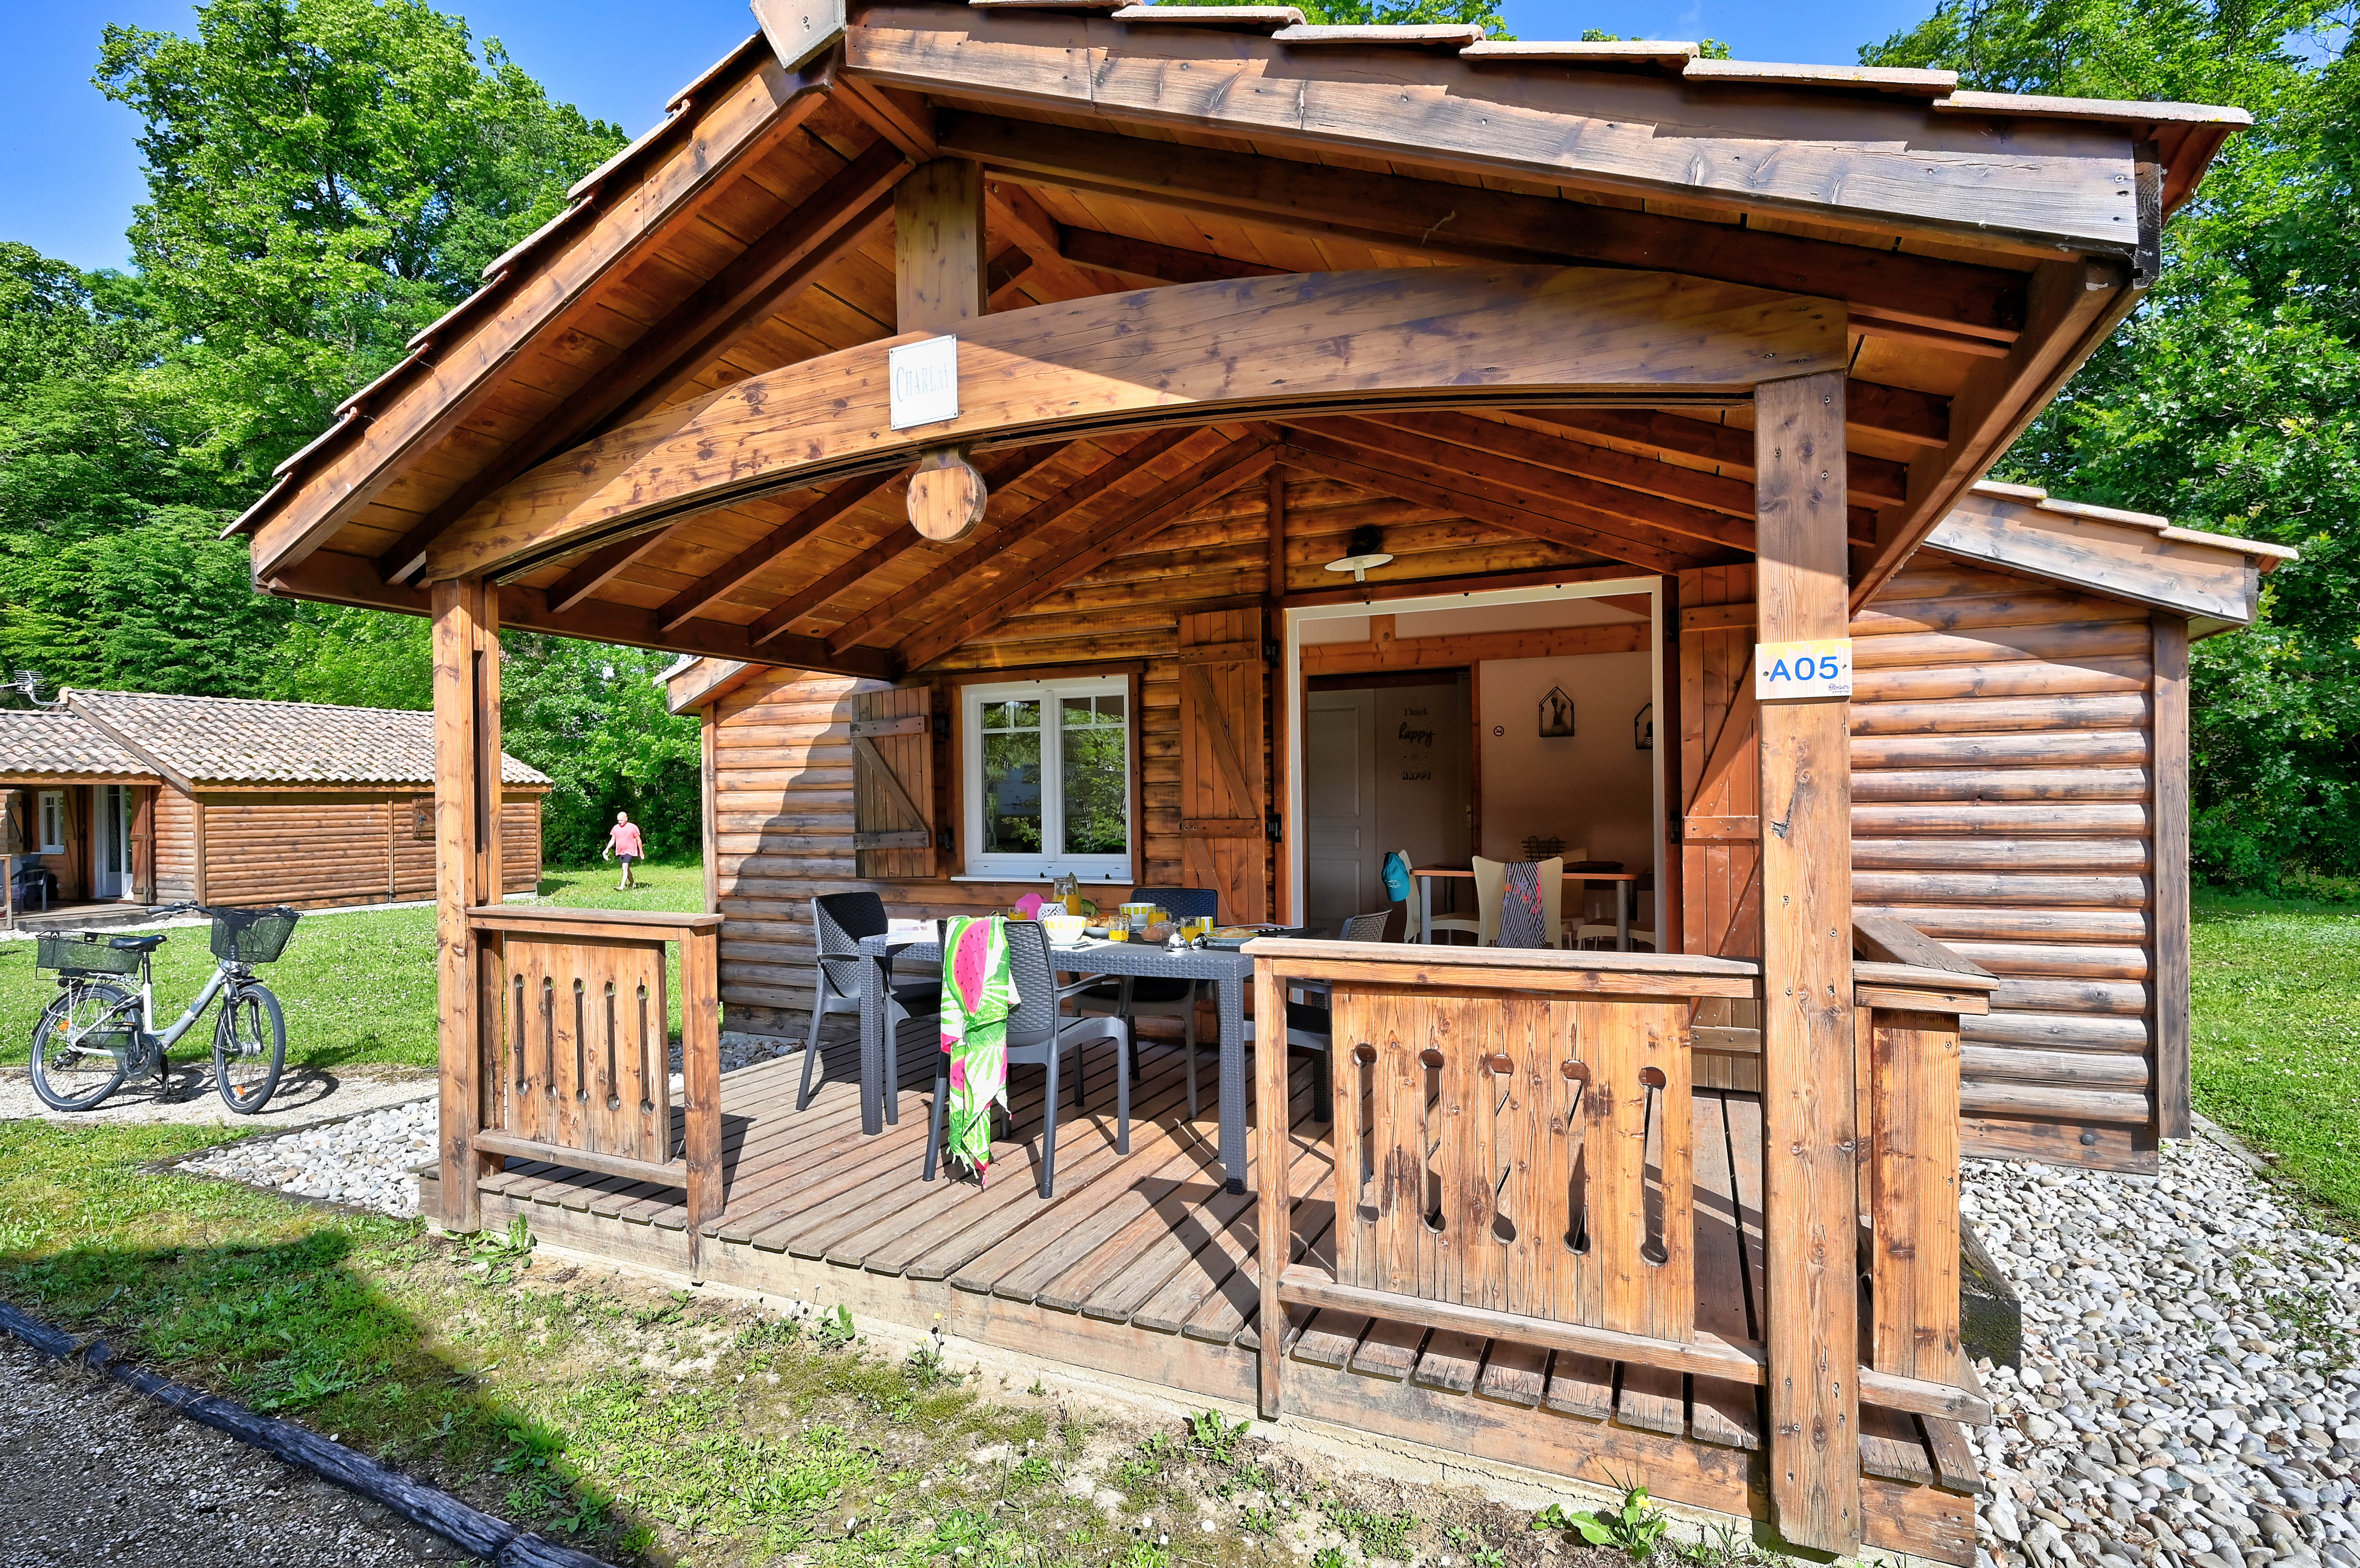 Accommodation - Chalet Premium 35M² 2 Bedrooms With Covered Terrace + Air Conditionning + Tv + Dishwasher - Flower Camping Le Château